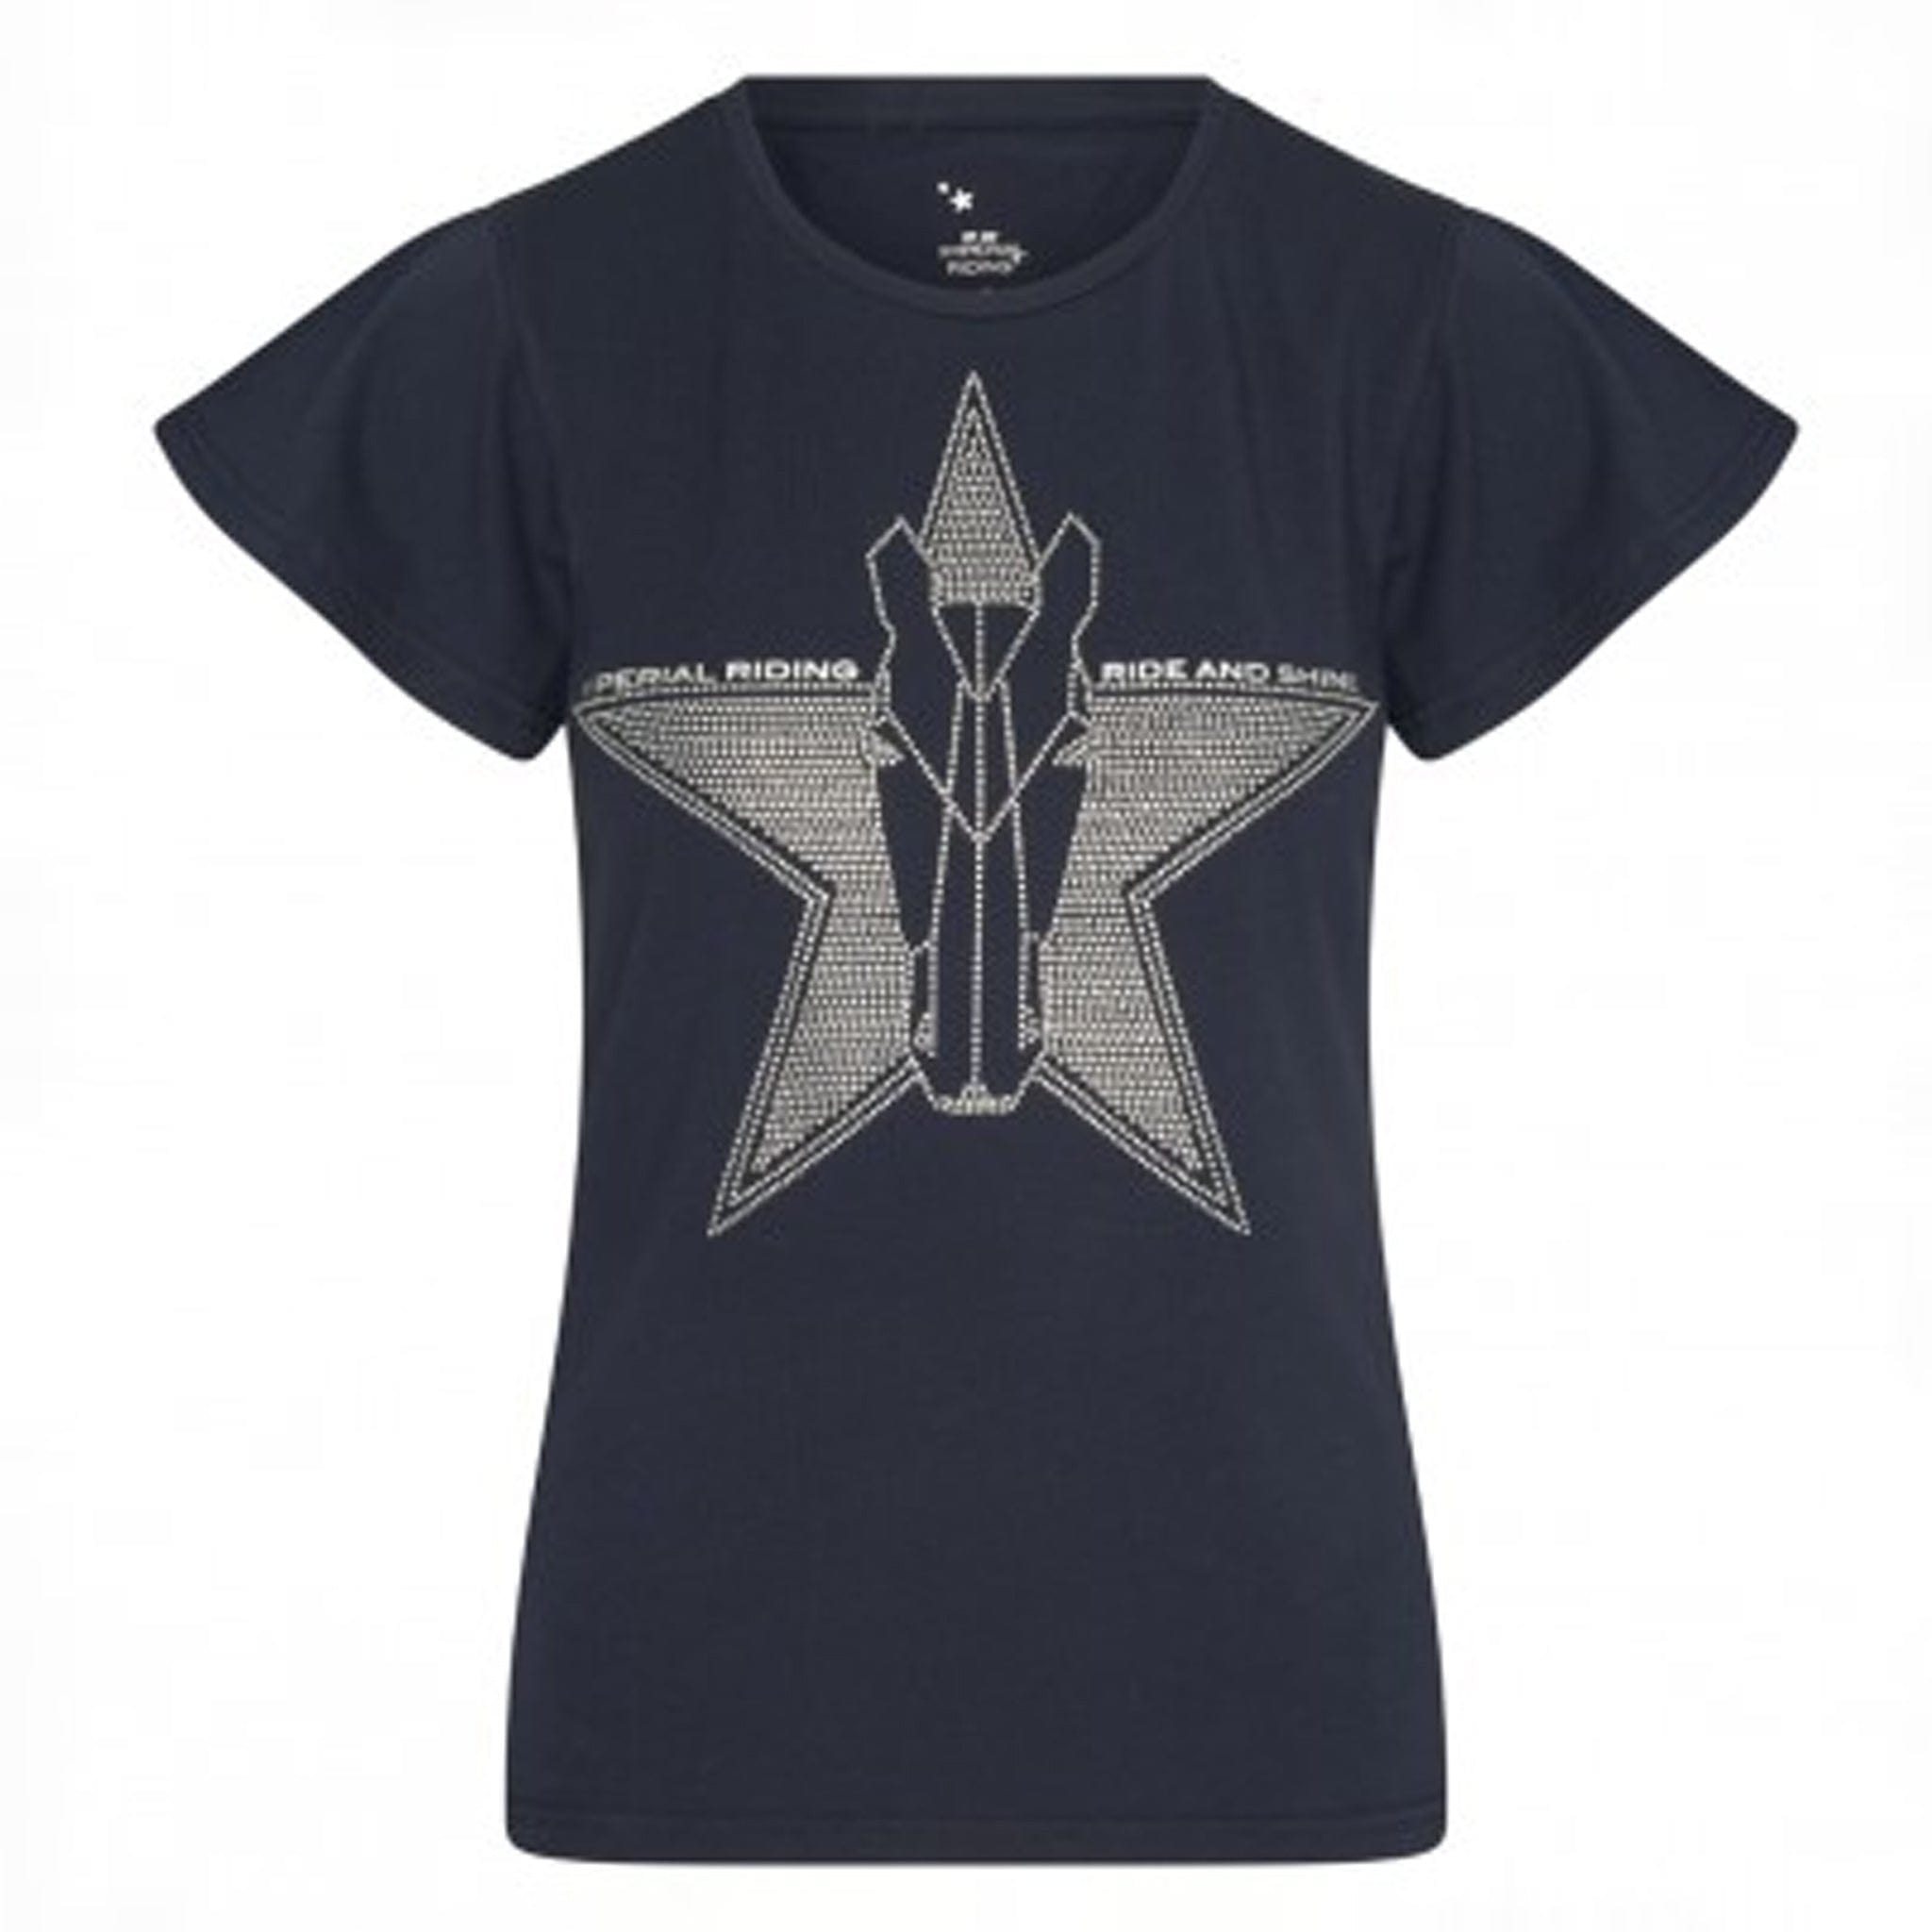 Imperial Riding Belle Star Short Sleeve T-Shirt KL35121006 Navy Front View